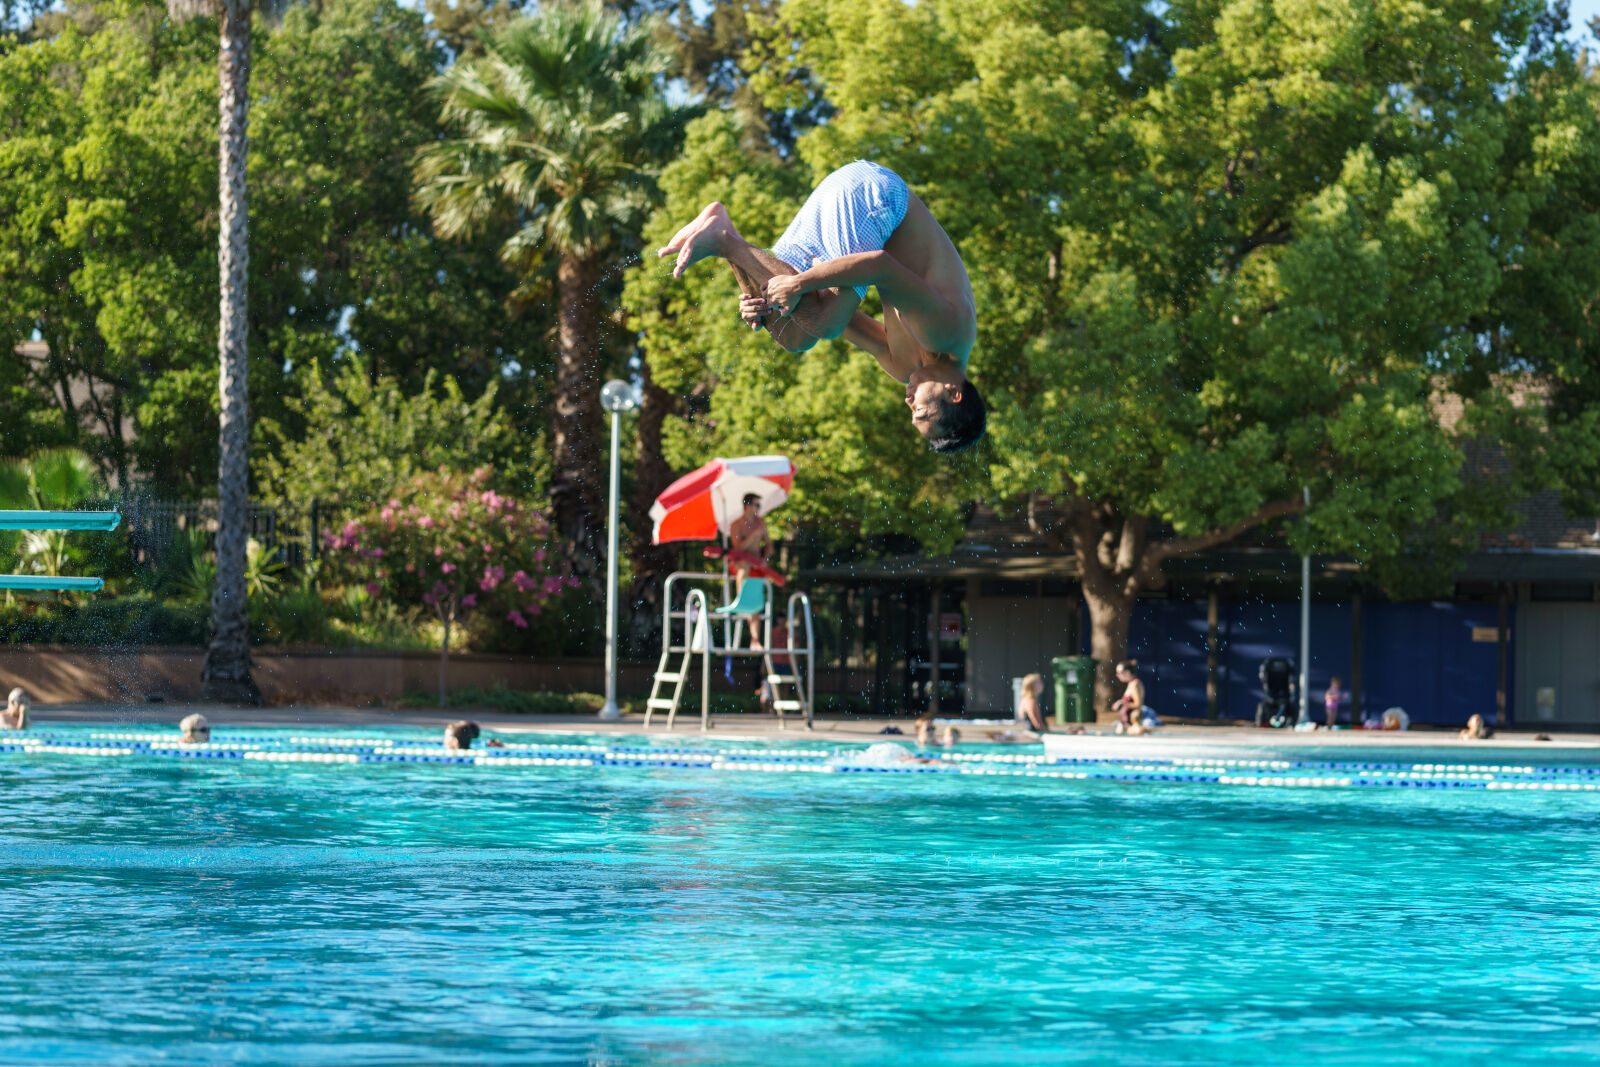 Sony a6000 sample photo. Cannonball, dive, diving, board photography